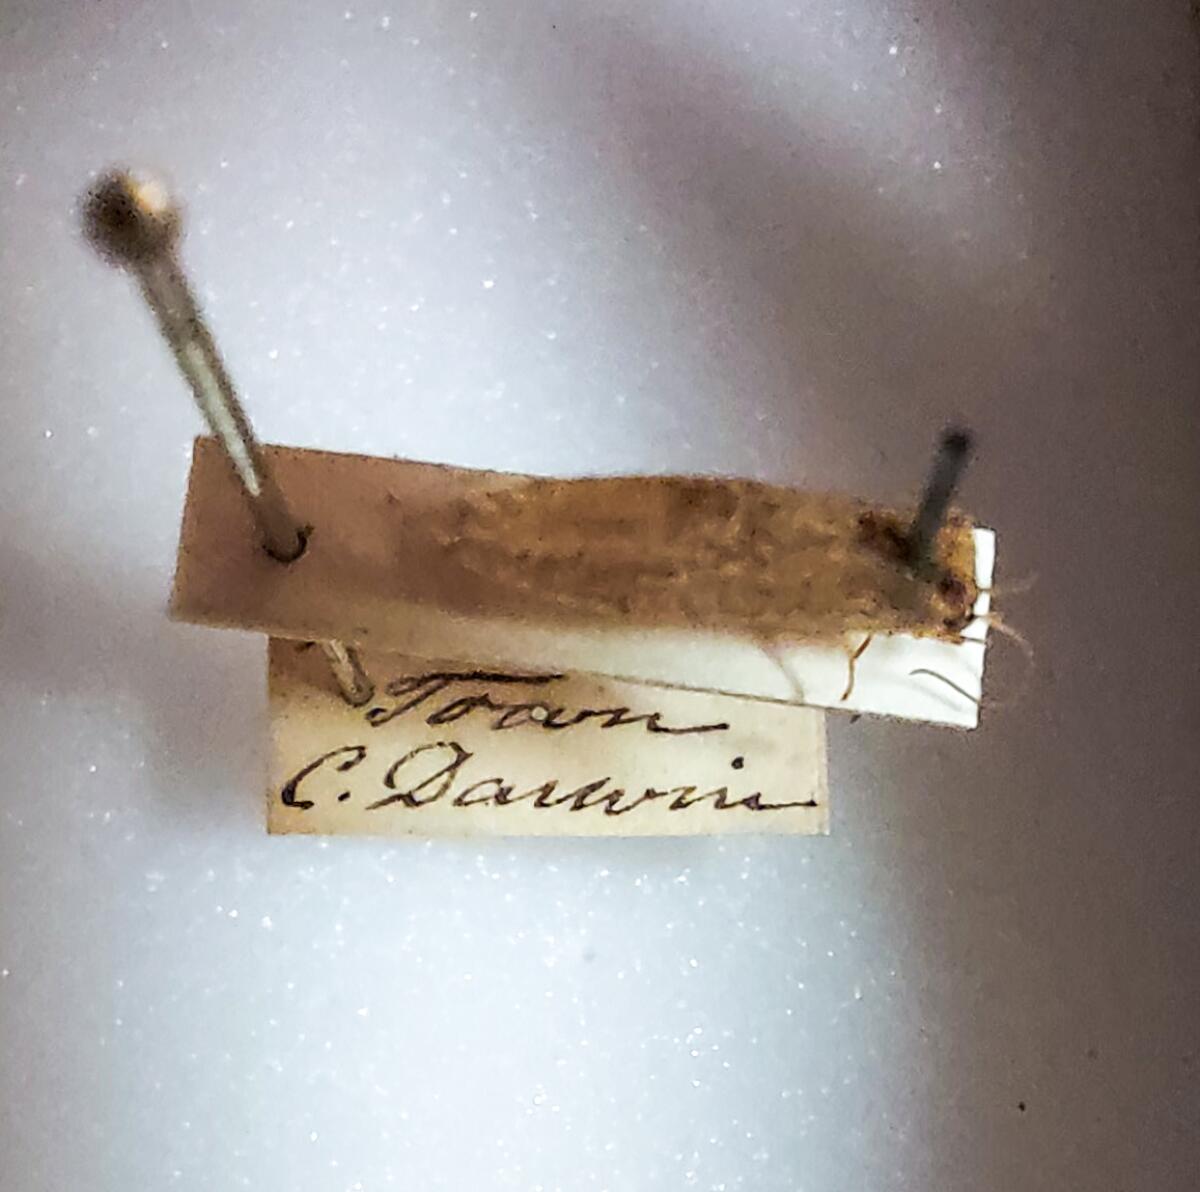 This brown lacewing insect at the San Diego Natural History Museum was collected by Charles Darwin.